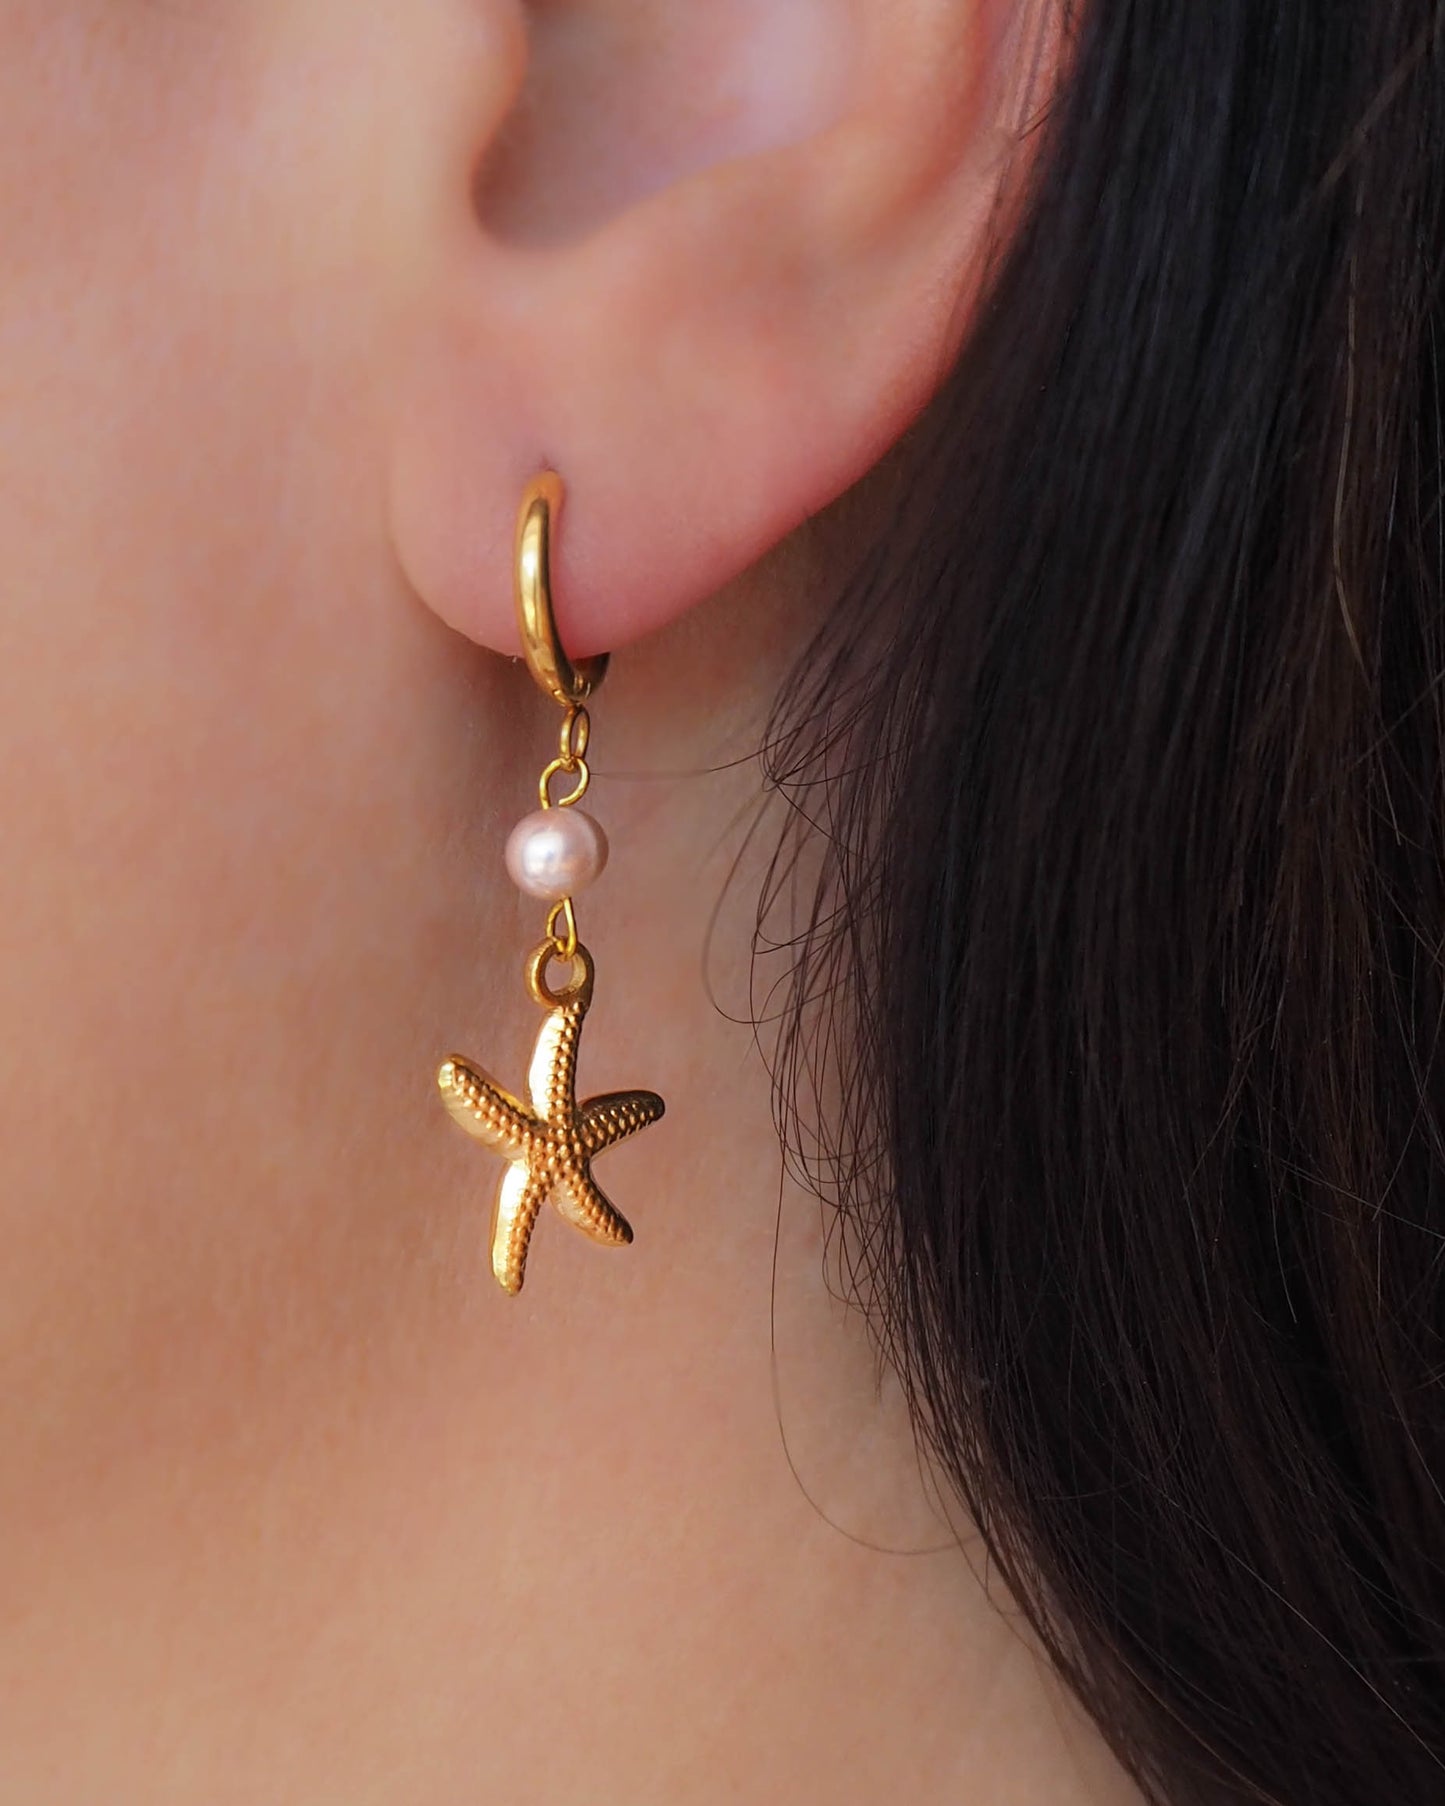 Model wearing gold Sea Star Stainless Steel Earrings with Freshwater pearl Beads and Golden Sea Star - Ocean Inspired Jewelry